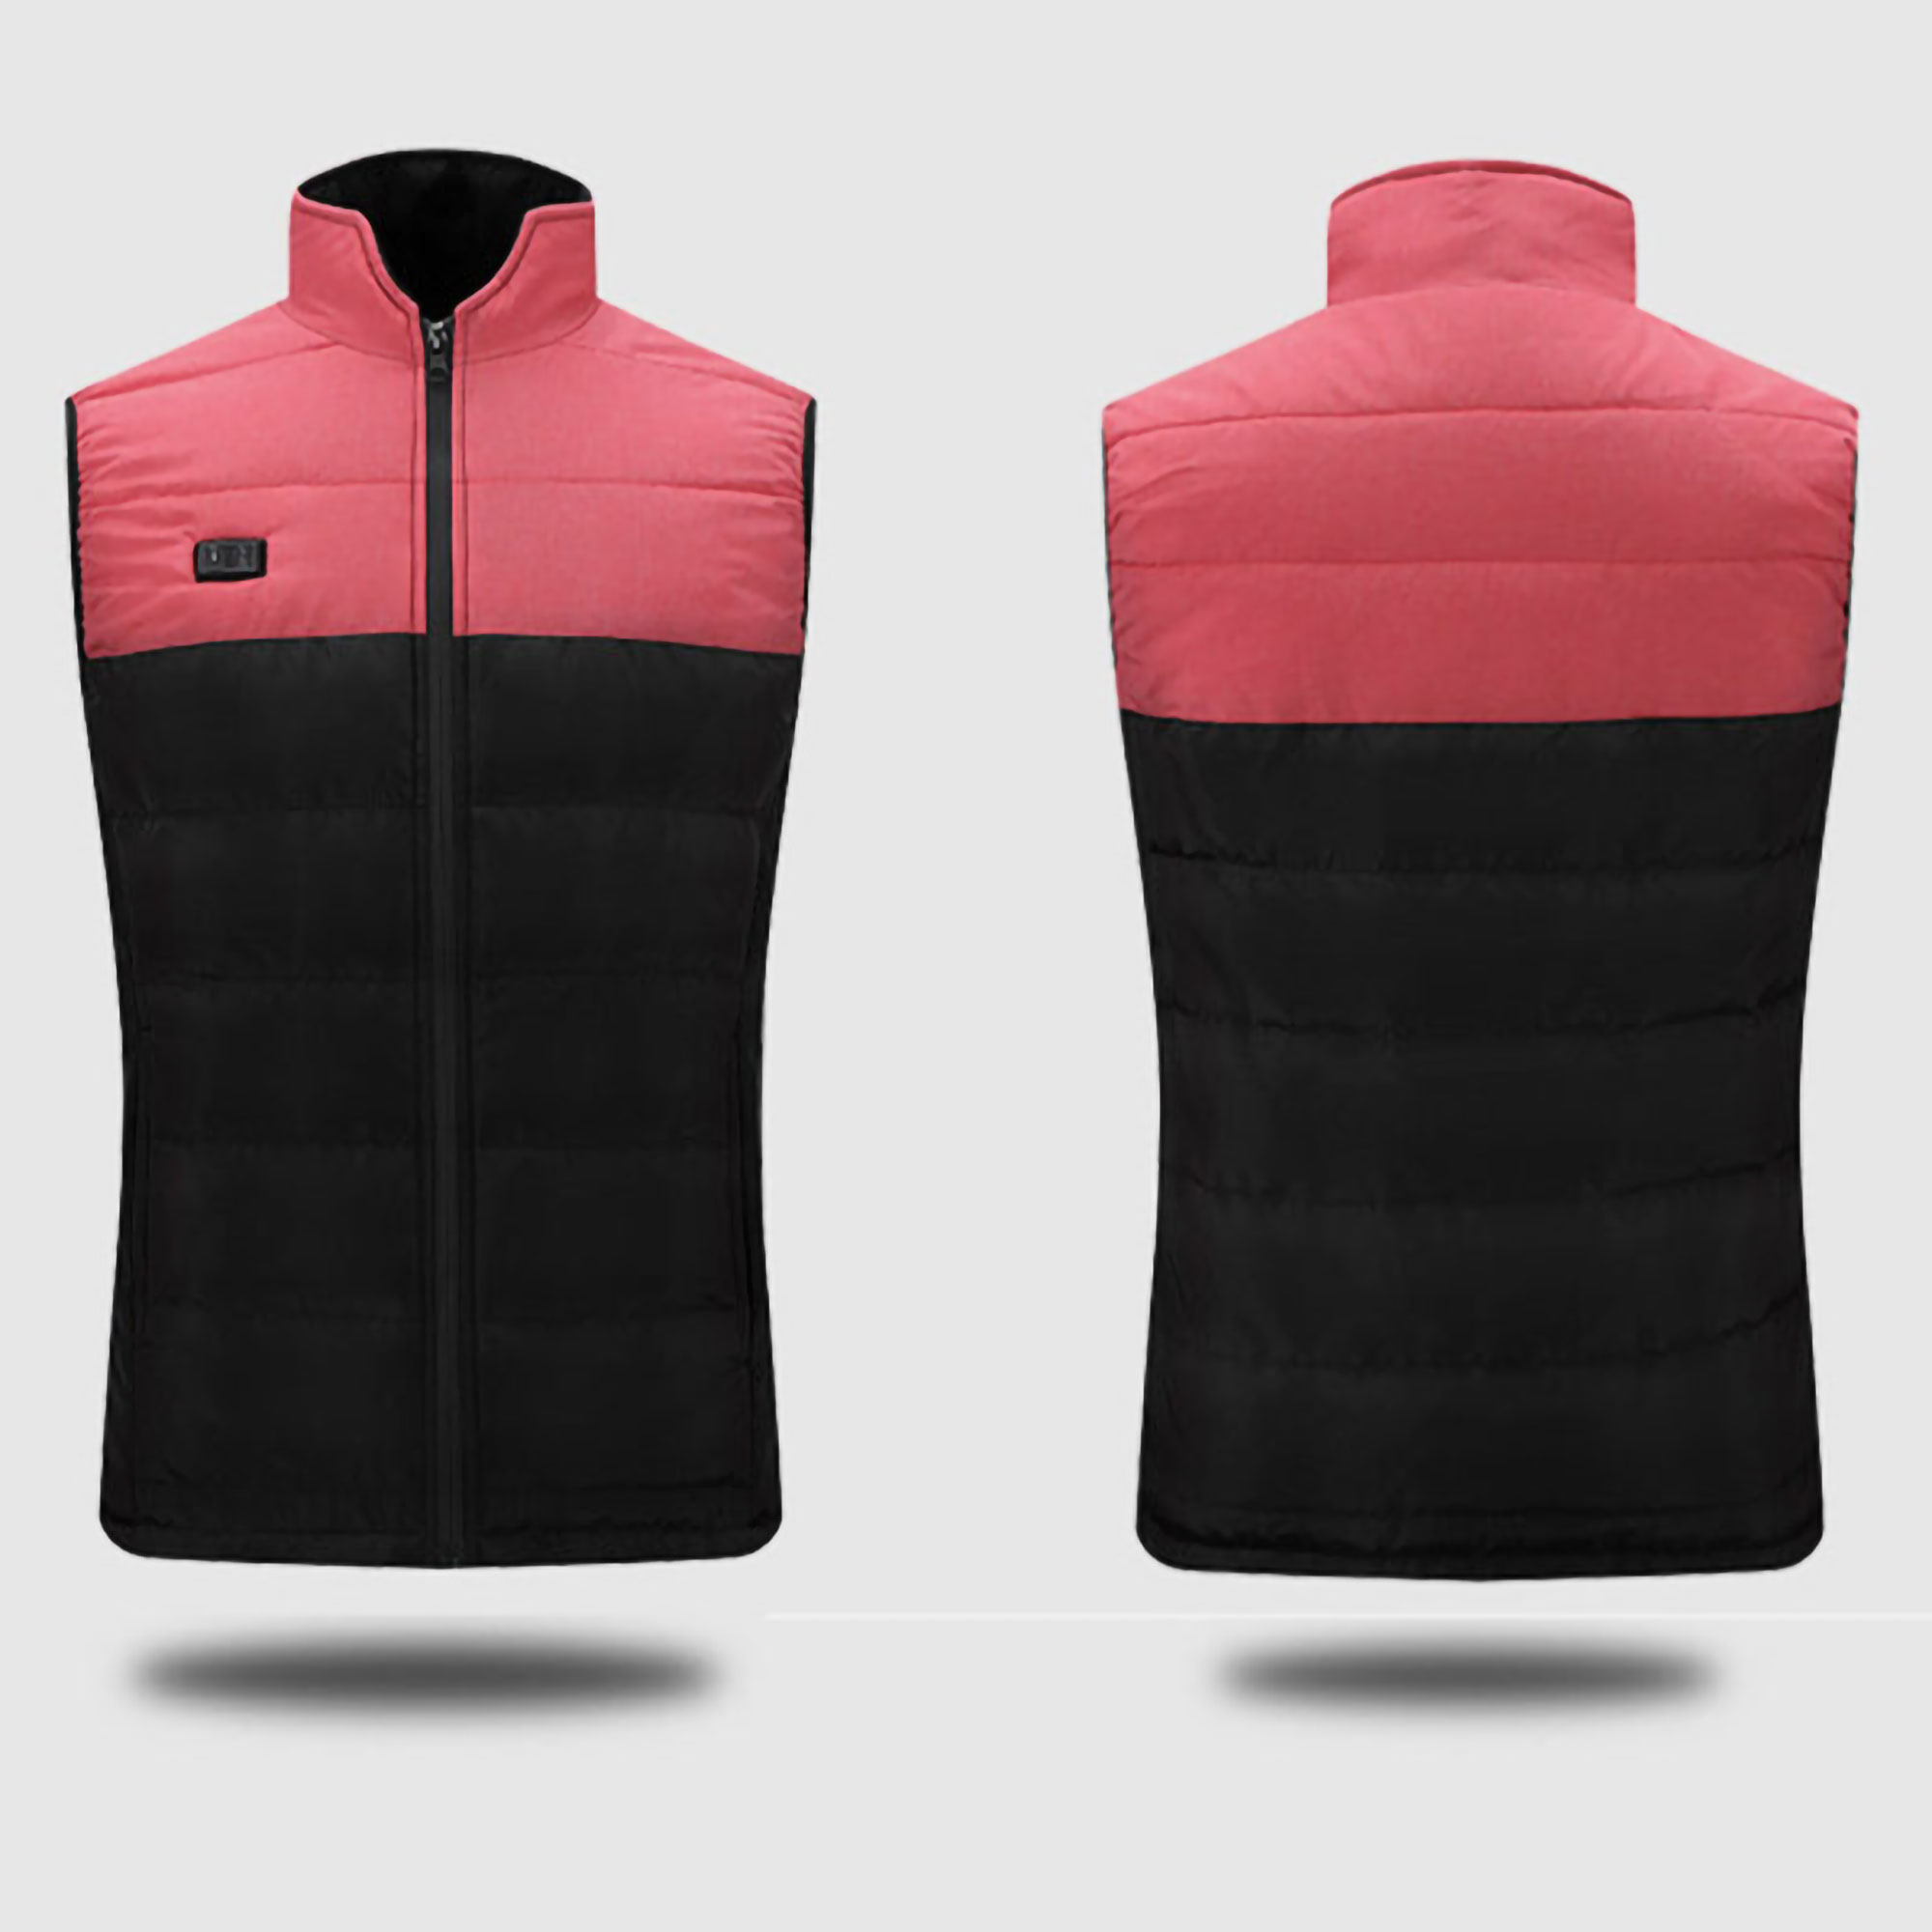 Sexy Dance Lightweight Heated Vest for Men Women Electric Thermal Jacket Sleeveless Zipper Coat Winter Warmth Heating Outwear With Battery Pack - image 3 of 3